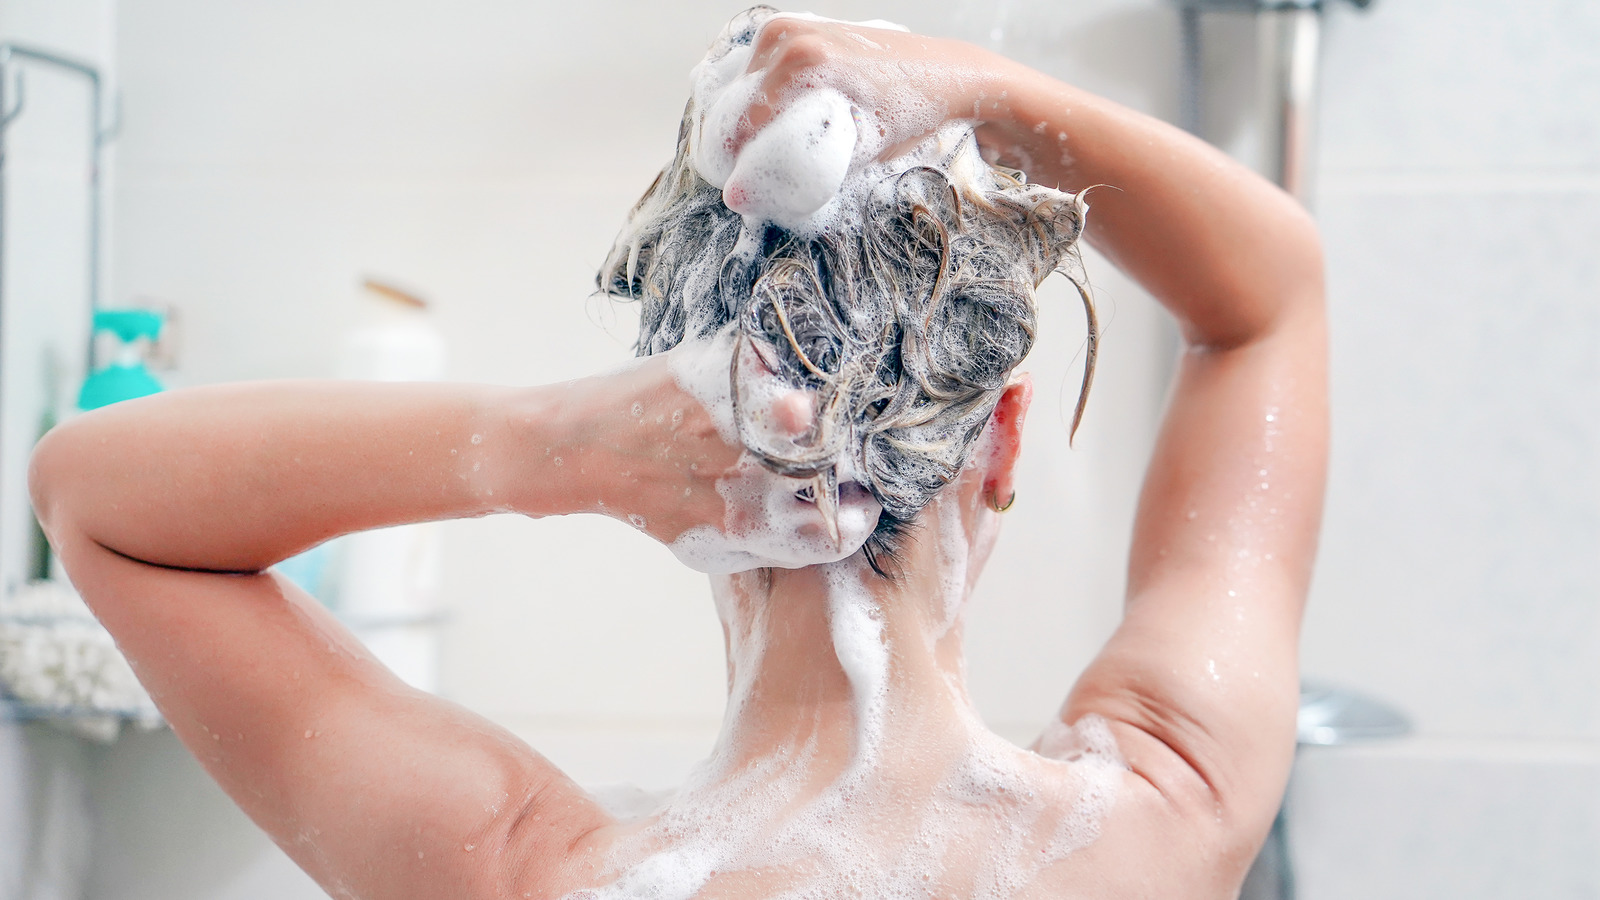 Woman getting new shower after mushroom appears